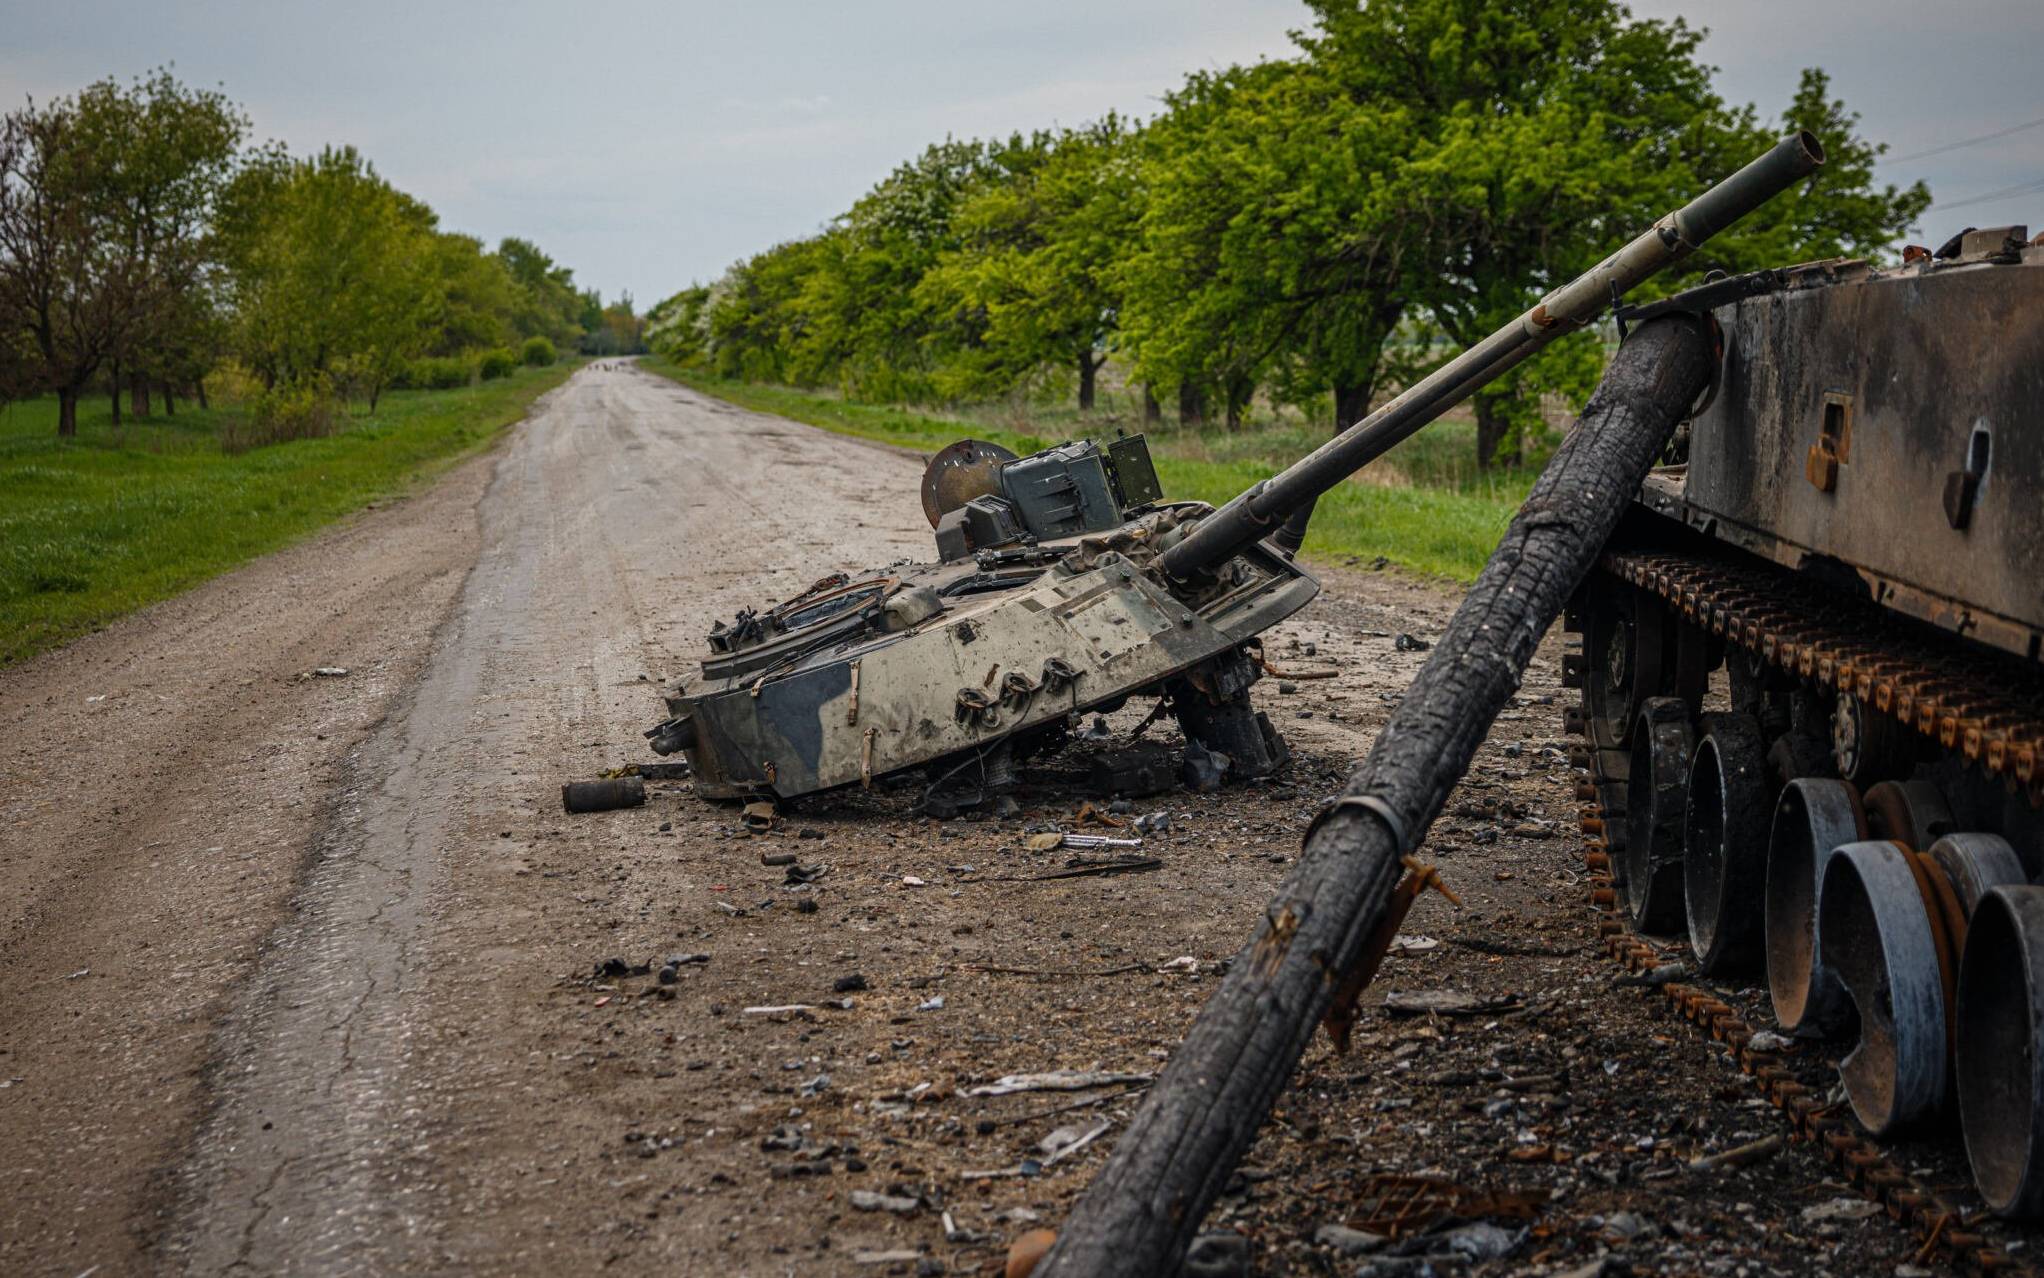 A photograph taken on May 4, 2022 shows a destroyed Russian BMP-3 infantry fighting vehicle on a road near Pokrovske, eastern Ukraine amid the Russian invasion of Ukraine. - The blaze in a football field-length storage building has been burning at least a day  but there's no firefighters in Temyrivka because everyone has evacuated, leaving the black smoke to rises unhurriedly. That village is in a no man's land where the two sides are so close, in some places about 3 kms, that Ukrainian troops using binoculars can see the Russians digging at their positions. (Photo by Dimitar DILKOFF / AFP)